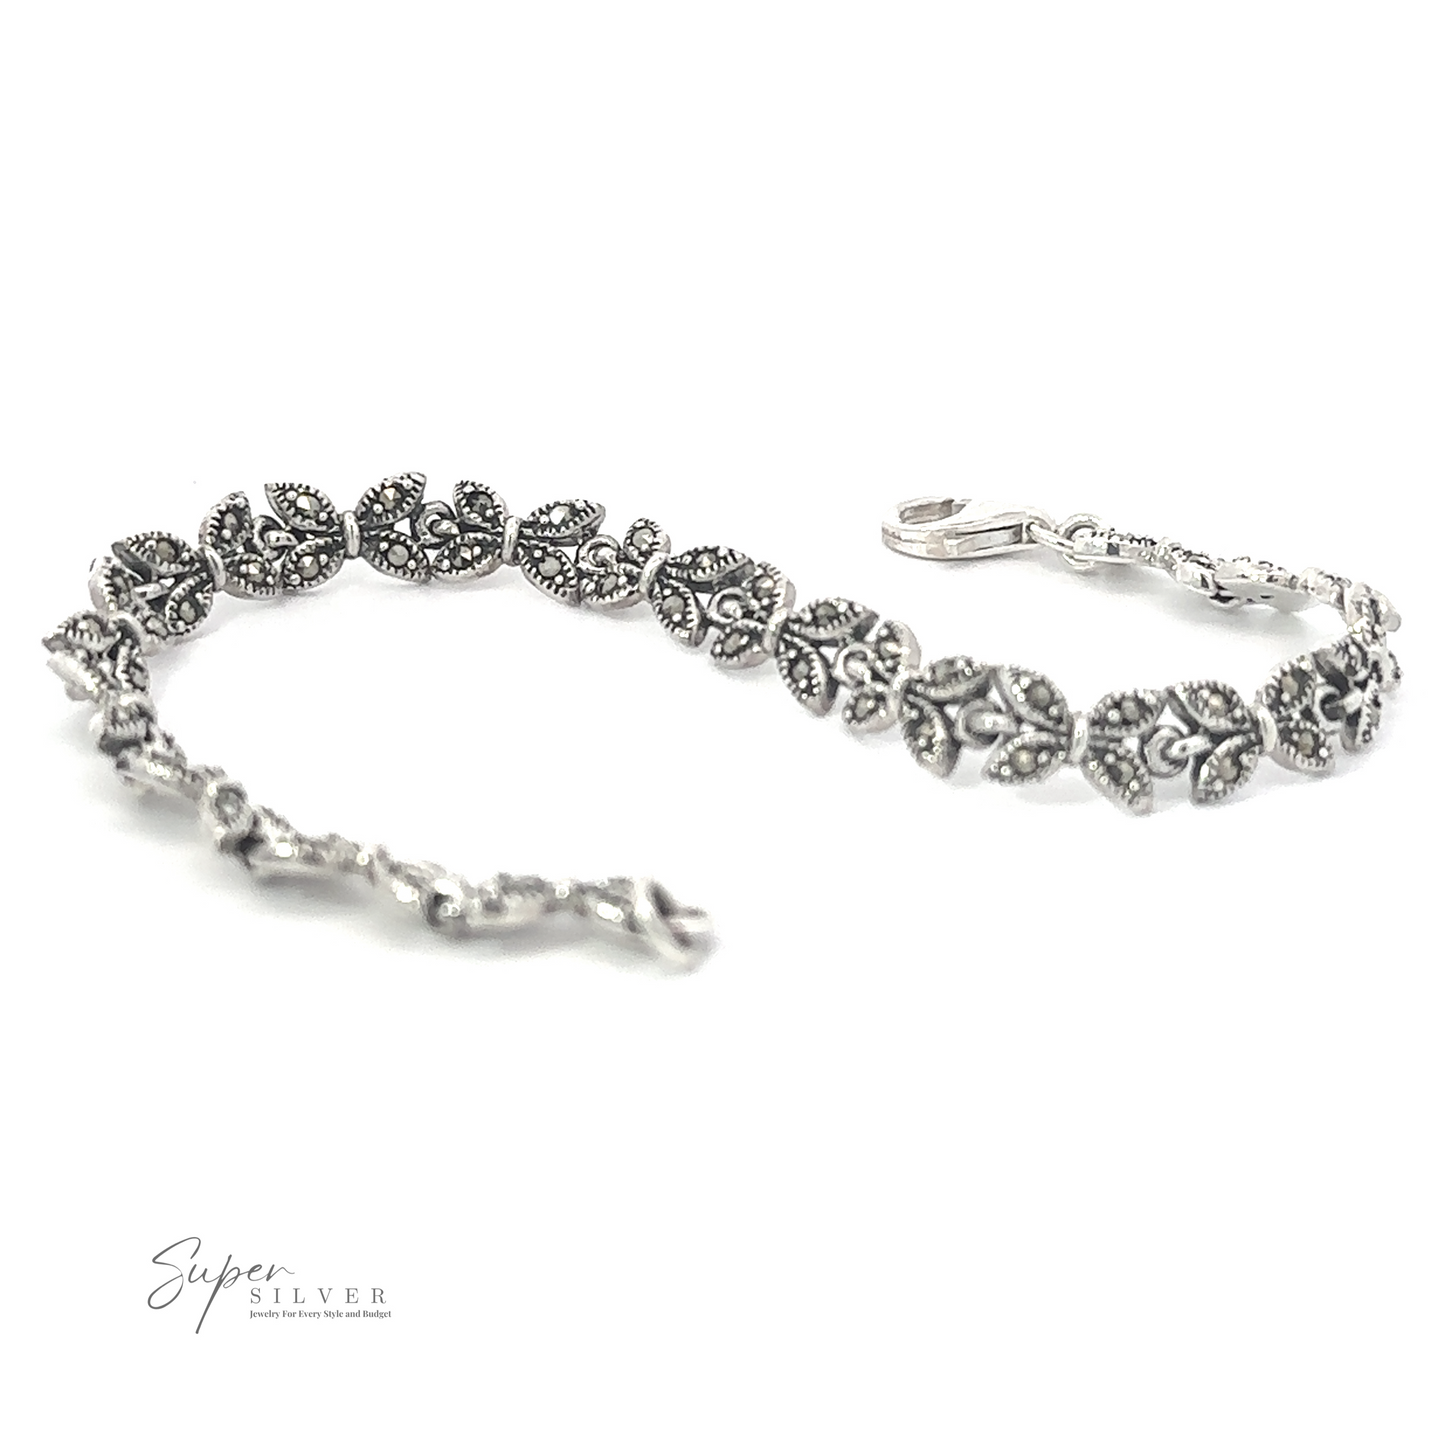 
                  
                    A Marcasite Butterfly Bracelet with detailed floral and leaf designs, placed on a white background. Made of .925 Sterling Silver, it features a subtle Art Deco era style. The clasp is visible, and the text "Super Silver" is in the bottom left corner.
                  
                